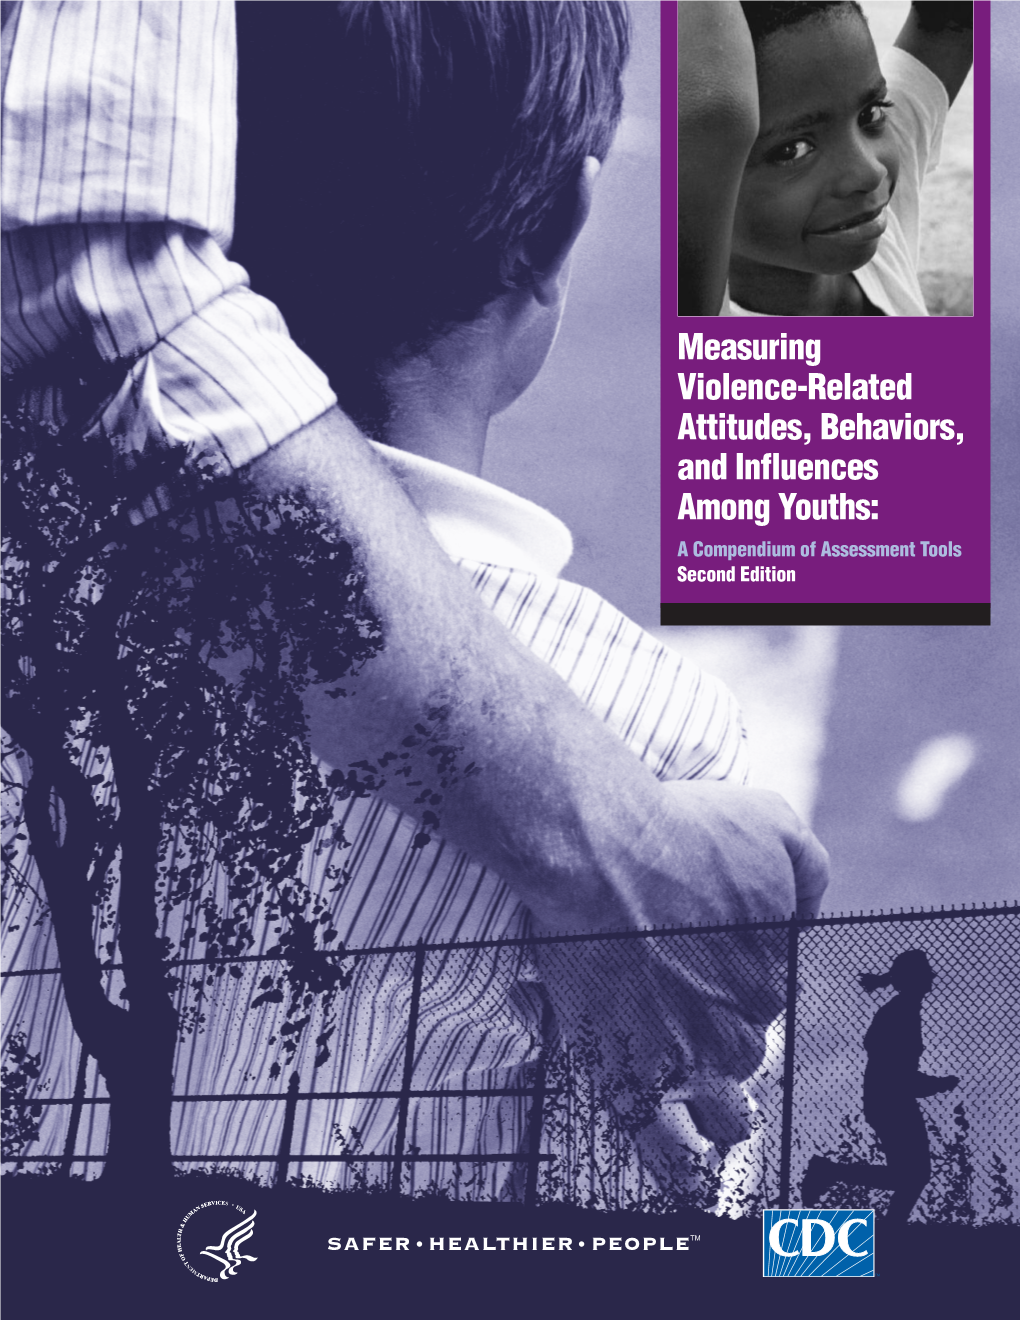 Measuring Violence-Related Attitudes, Behaviors, and Influences Among Youths: a Compendium of Assessment Tools Second Edition